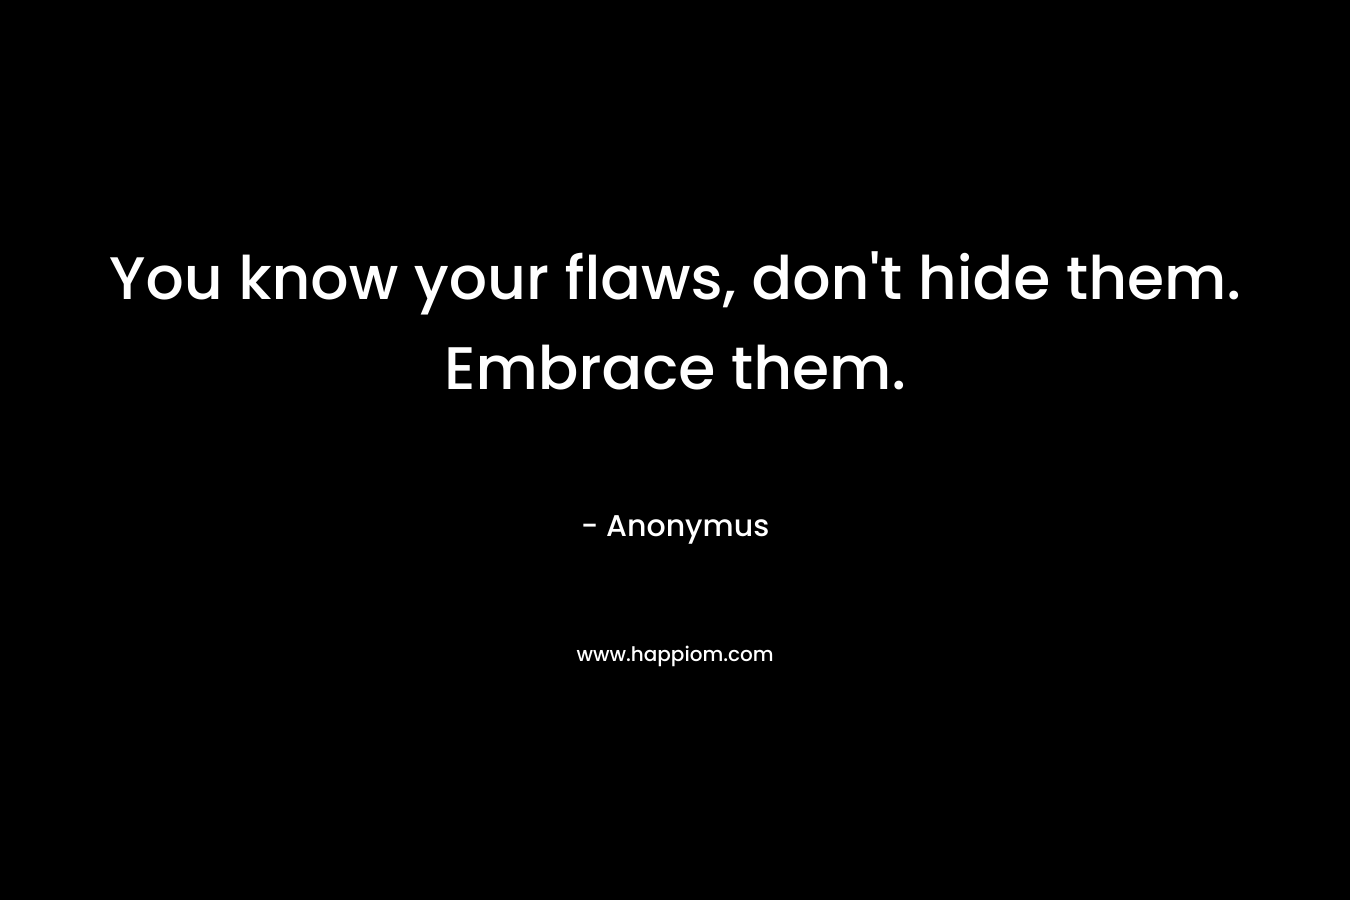 You know your flaws, don't hide them. Embrace them.